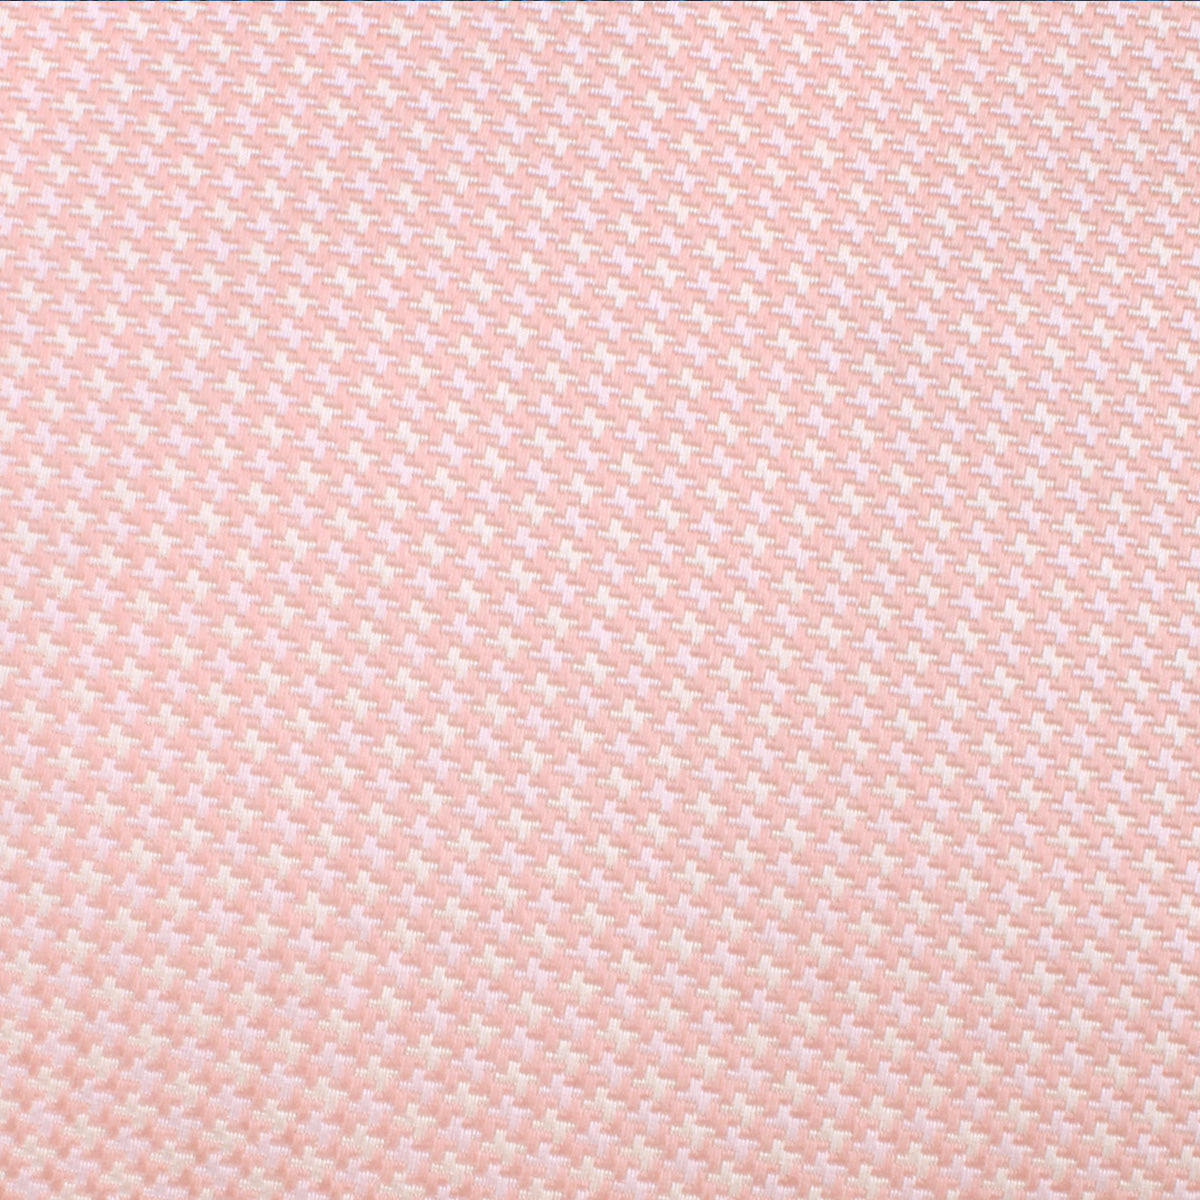 Blush Pink Houndstooth Skinny Tie Fabric